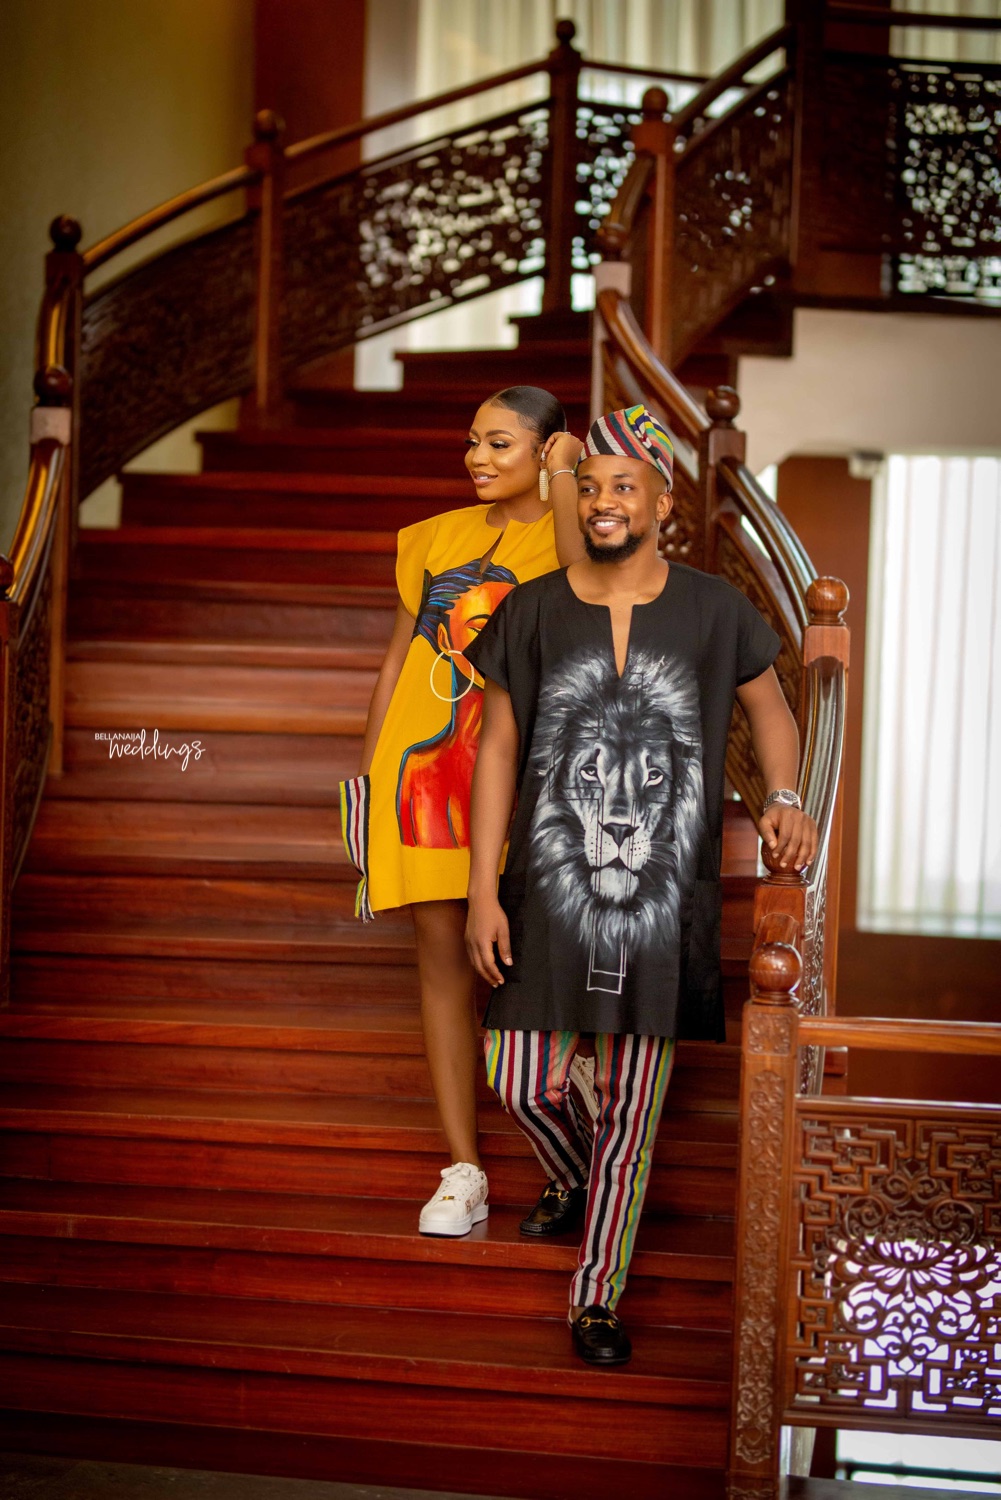 From Childhood Friends To Lovers! Check Out This Afrocentric Pre Wedding Photoshoot